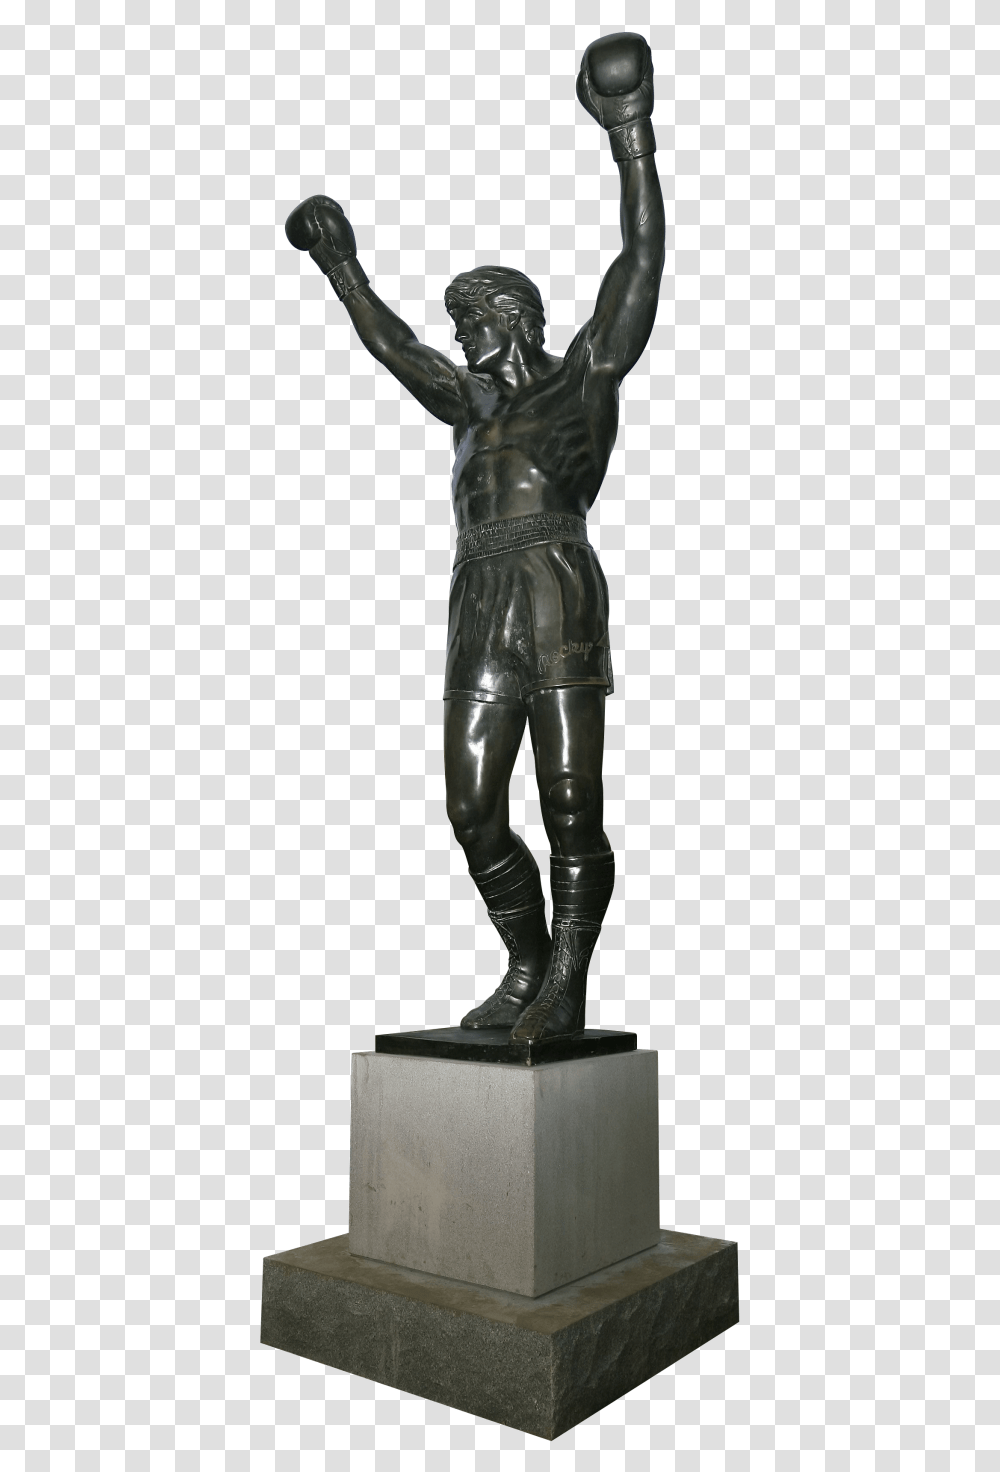 Sylvester Stallone Statue Image Free Download Searchpng Rocky Statue Clear Background, Apparel, Footwear, Shoe Transparent Png